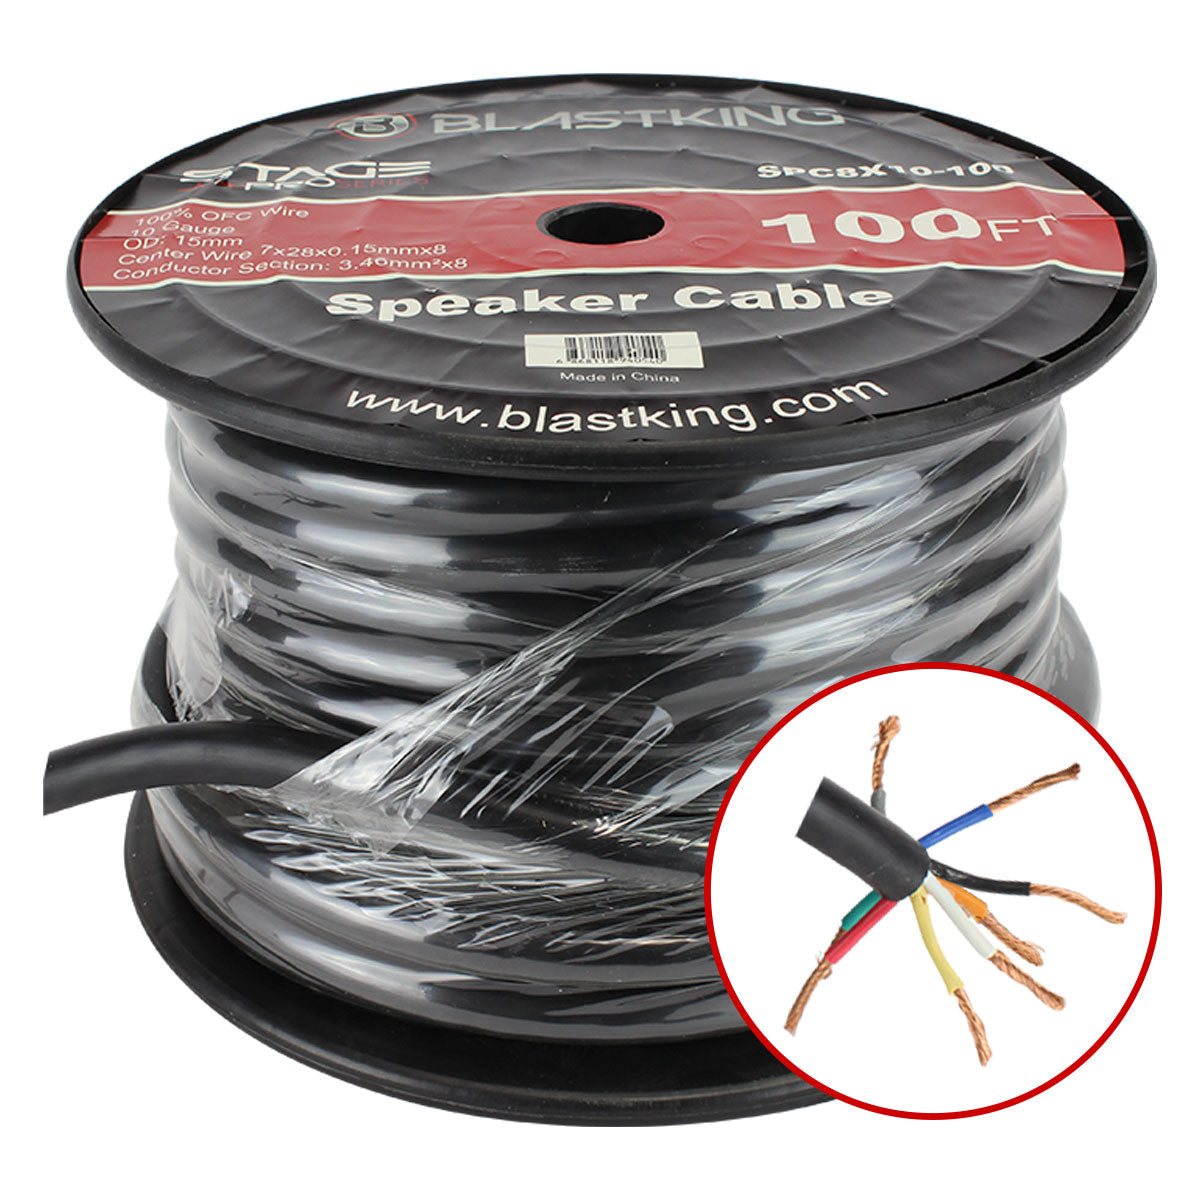 Blastking SPC8X10-100 10 AWG 8-Conductor Speaker Cable 100 Ft